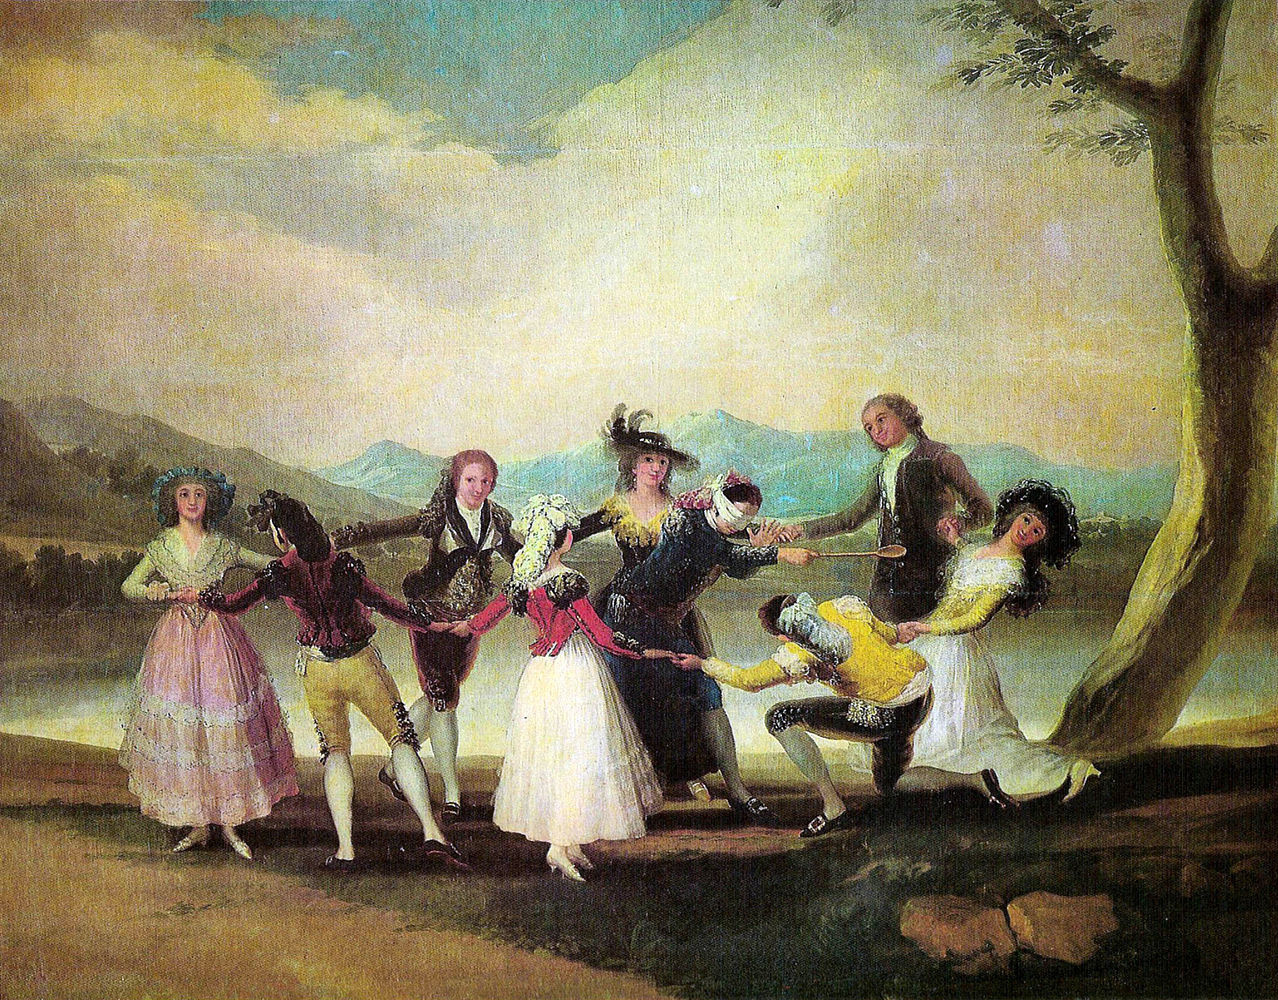 "Goya and the Court of Enlightenment" enthralling at the Bilbao Fine Arts Museum